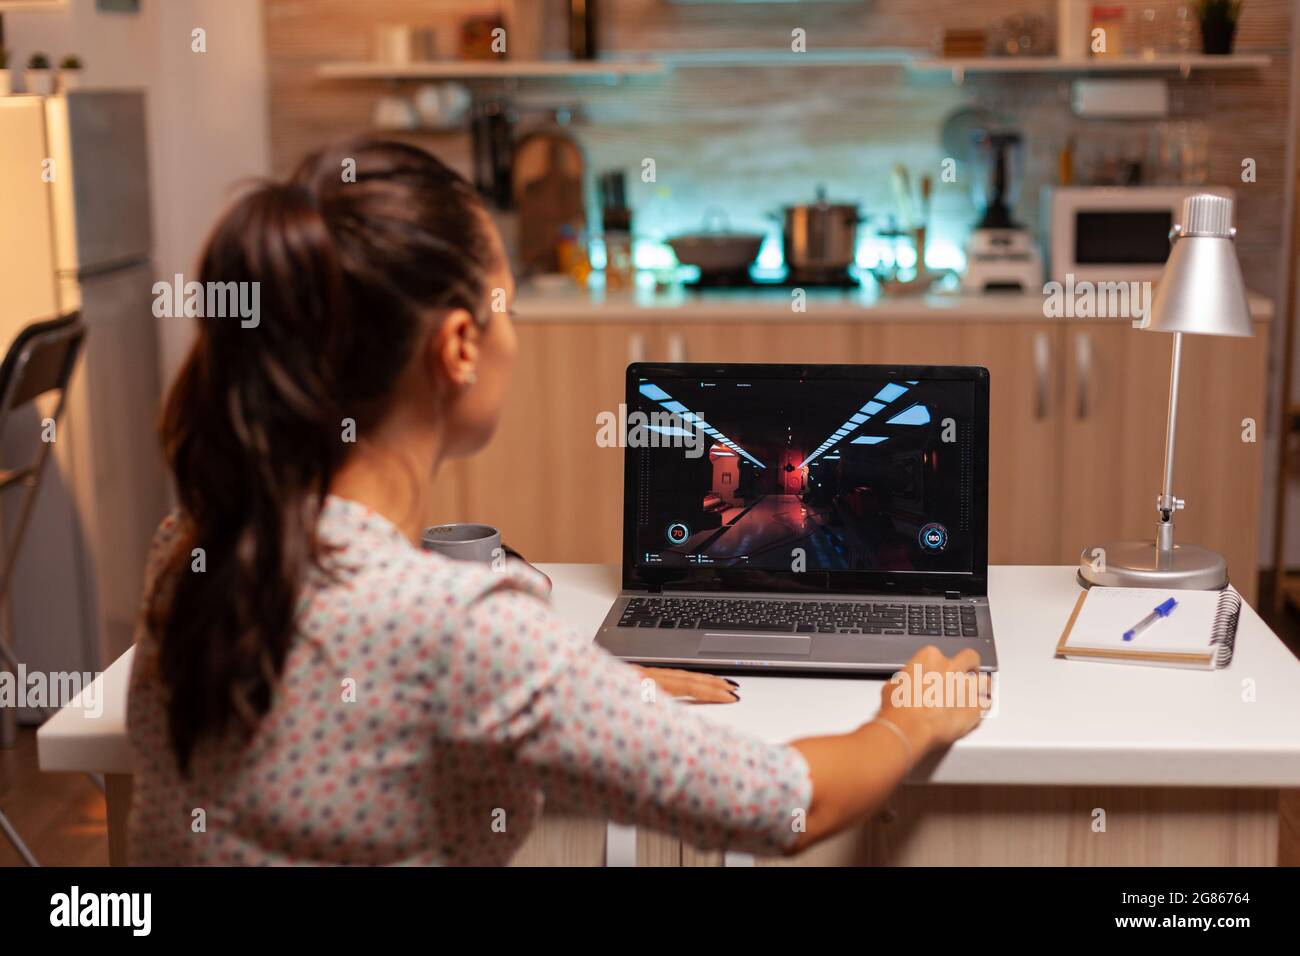 Female game developer working on new project on personal laptop in home kitchen during night time. Professional gamer playing online videop games on her personal computer. Geek cyber e-sport. Stock Photo